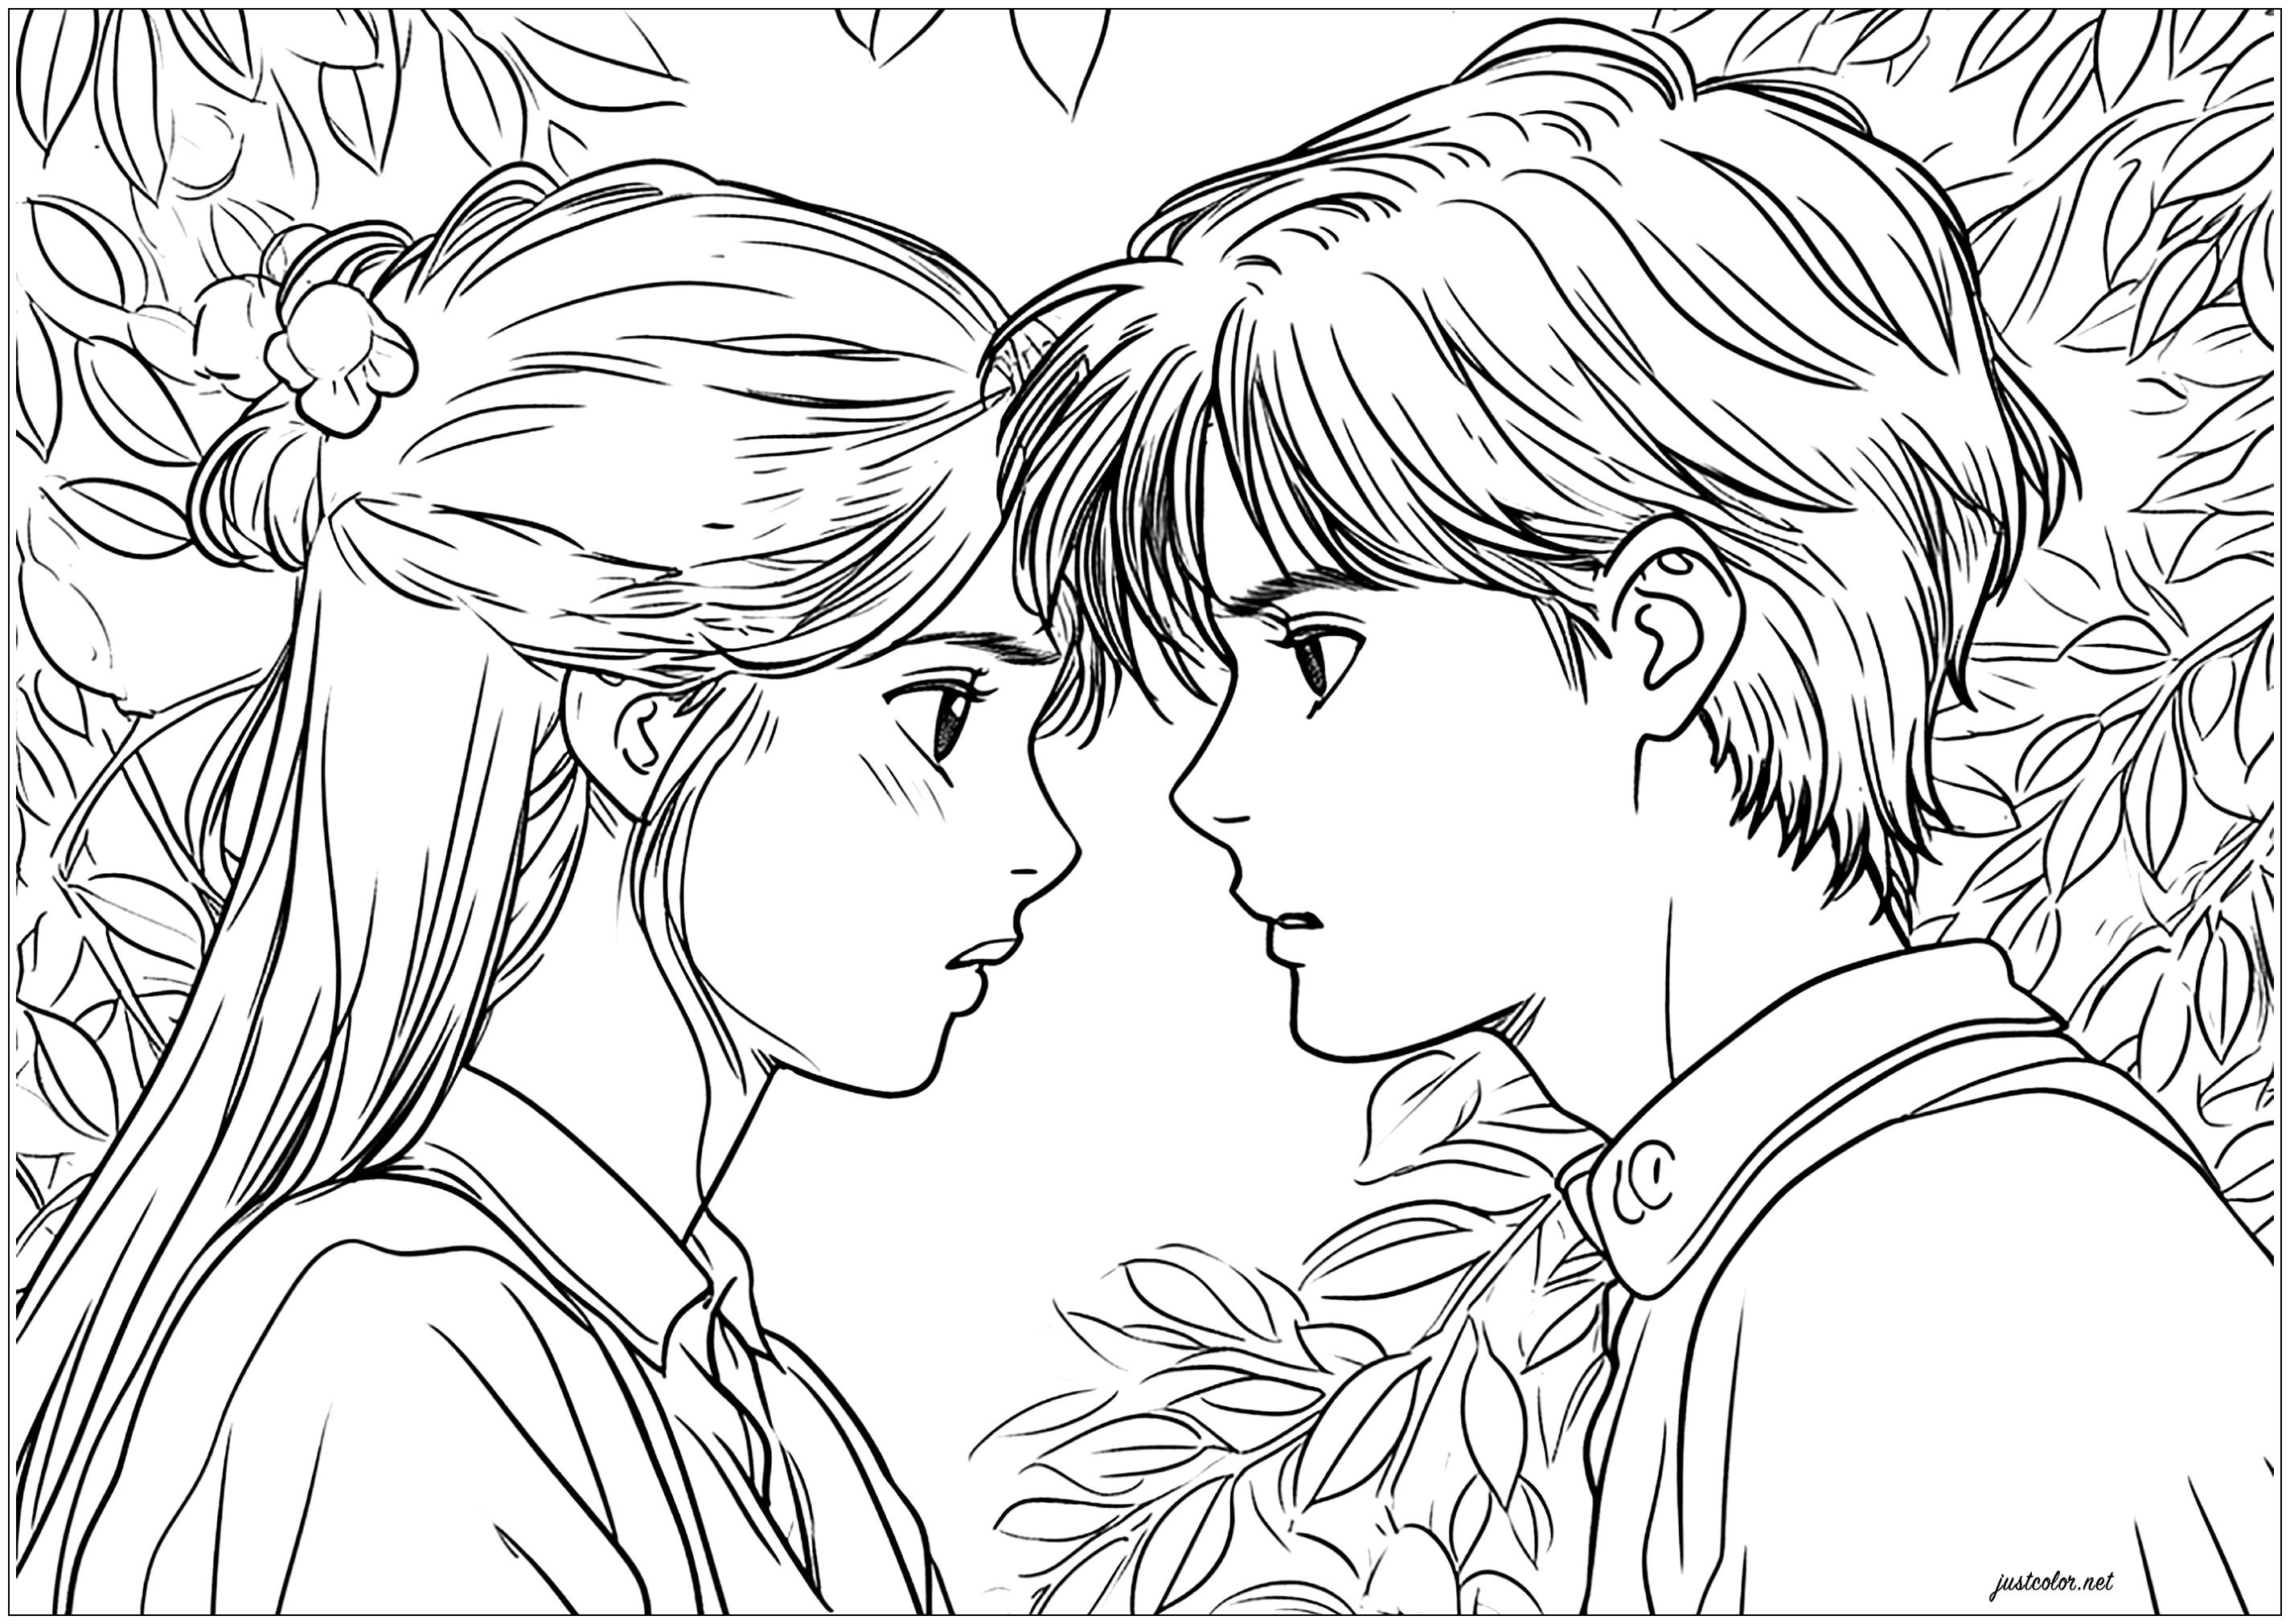 Manga-style coloring drawing for Valentine's Day